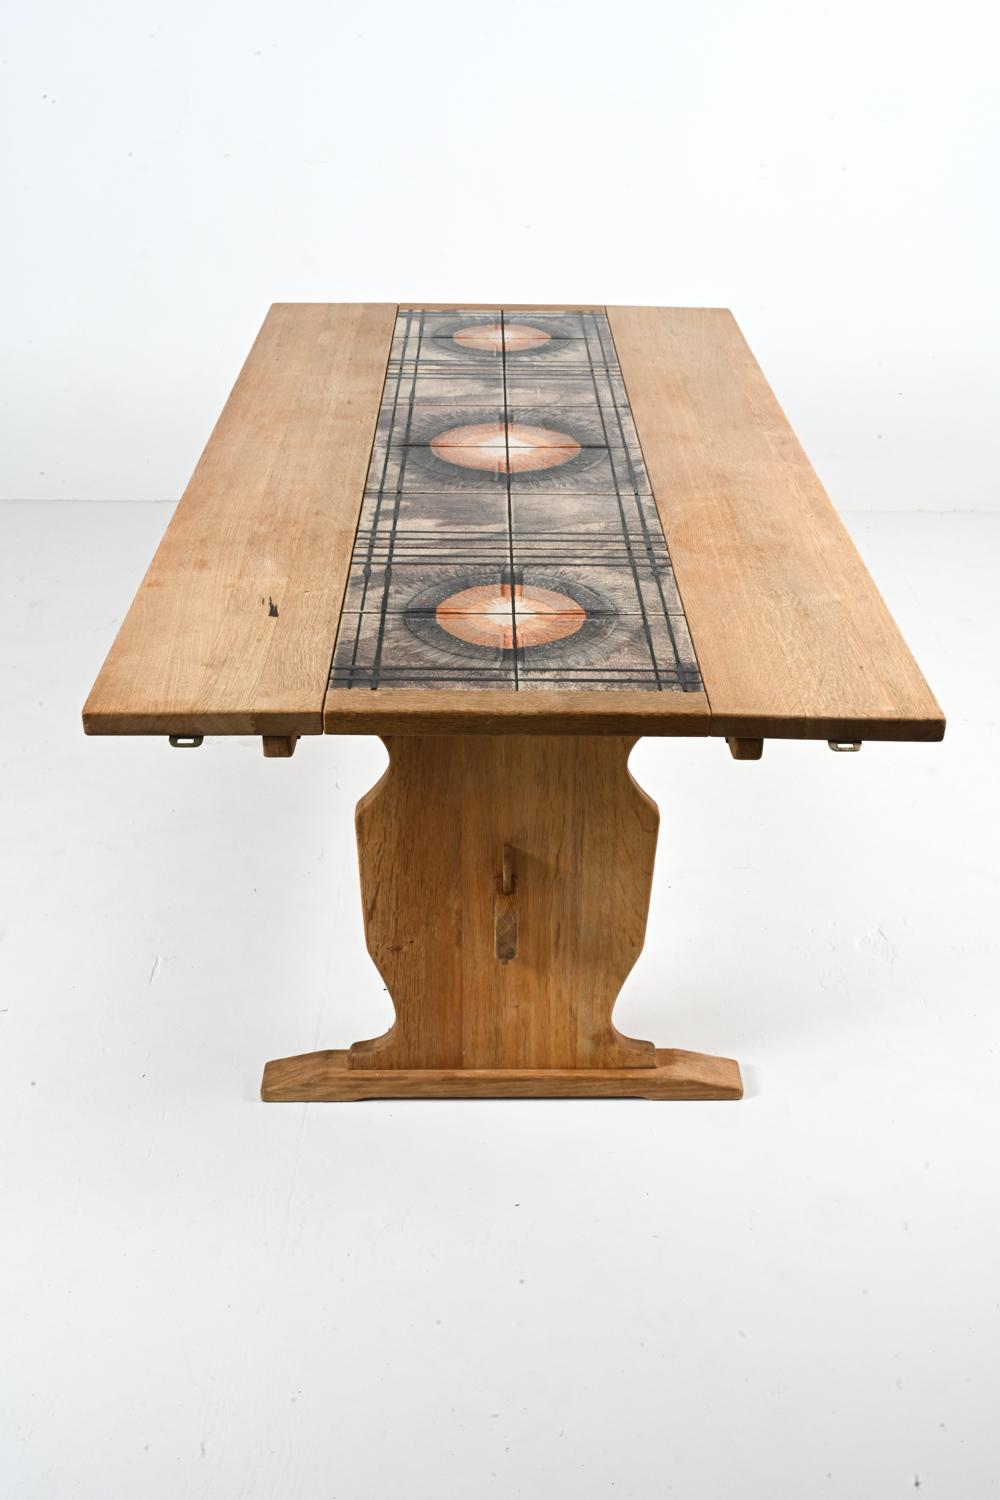 Danish Ox Art Oak & Ceramic Tile Mosaic-Top Dining Table With Leaves, c. 1970's For Sale 9